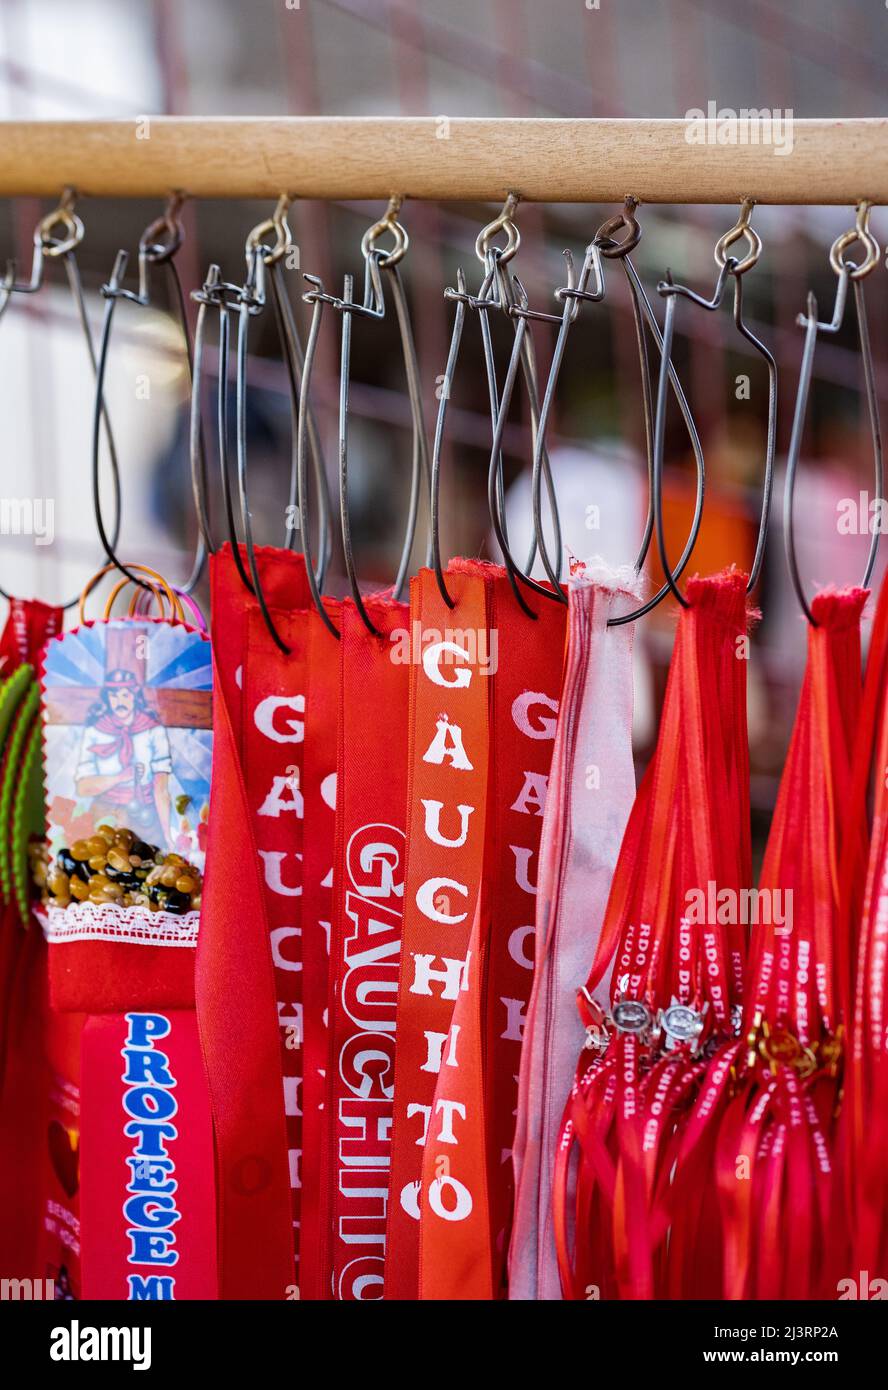 MERCEDES, CORRIENTES, ARGENTINA - NOVEMBER 22, 2021: Close up of red ribbons with the copy 'Gauchito Gil' in a souvenirs shop from the shrine to Gauch Stock Photo